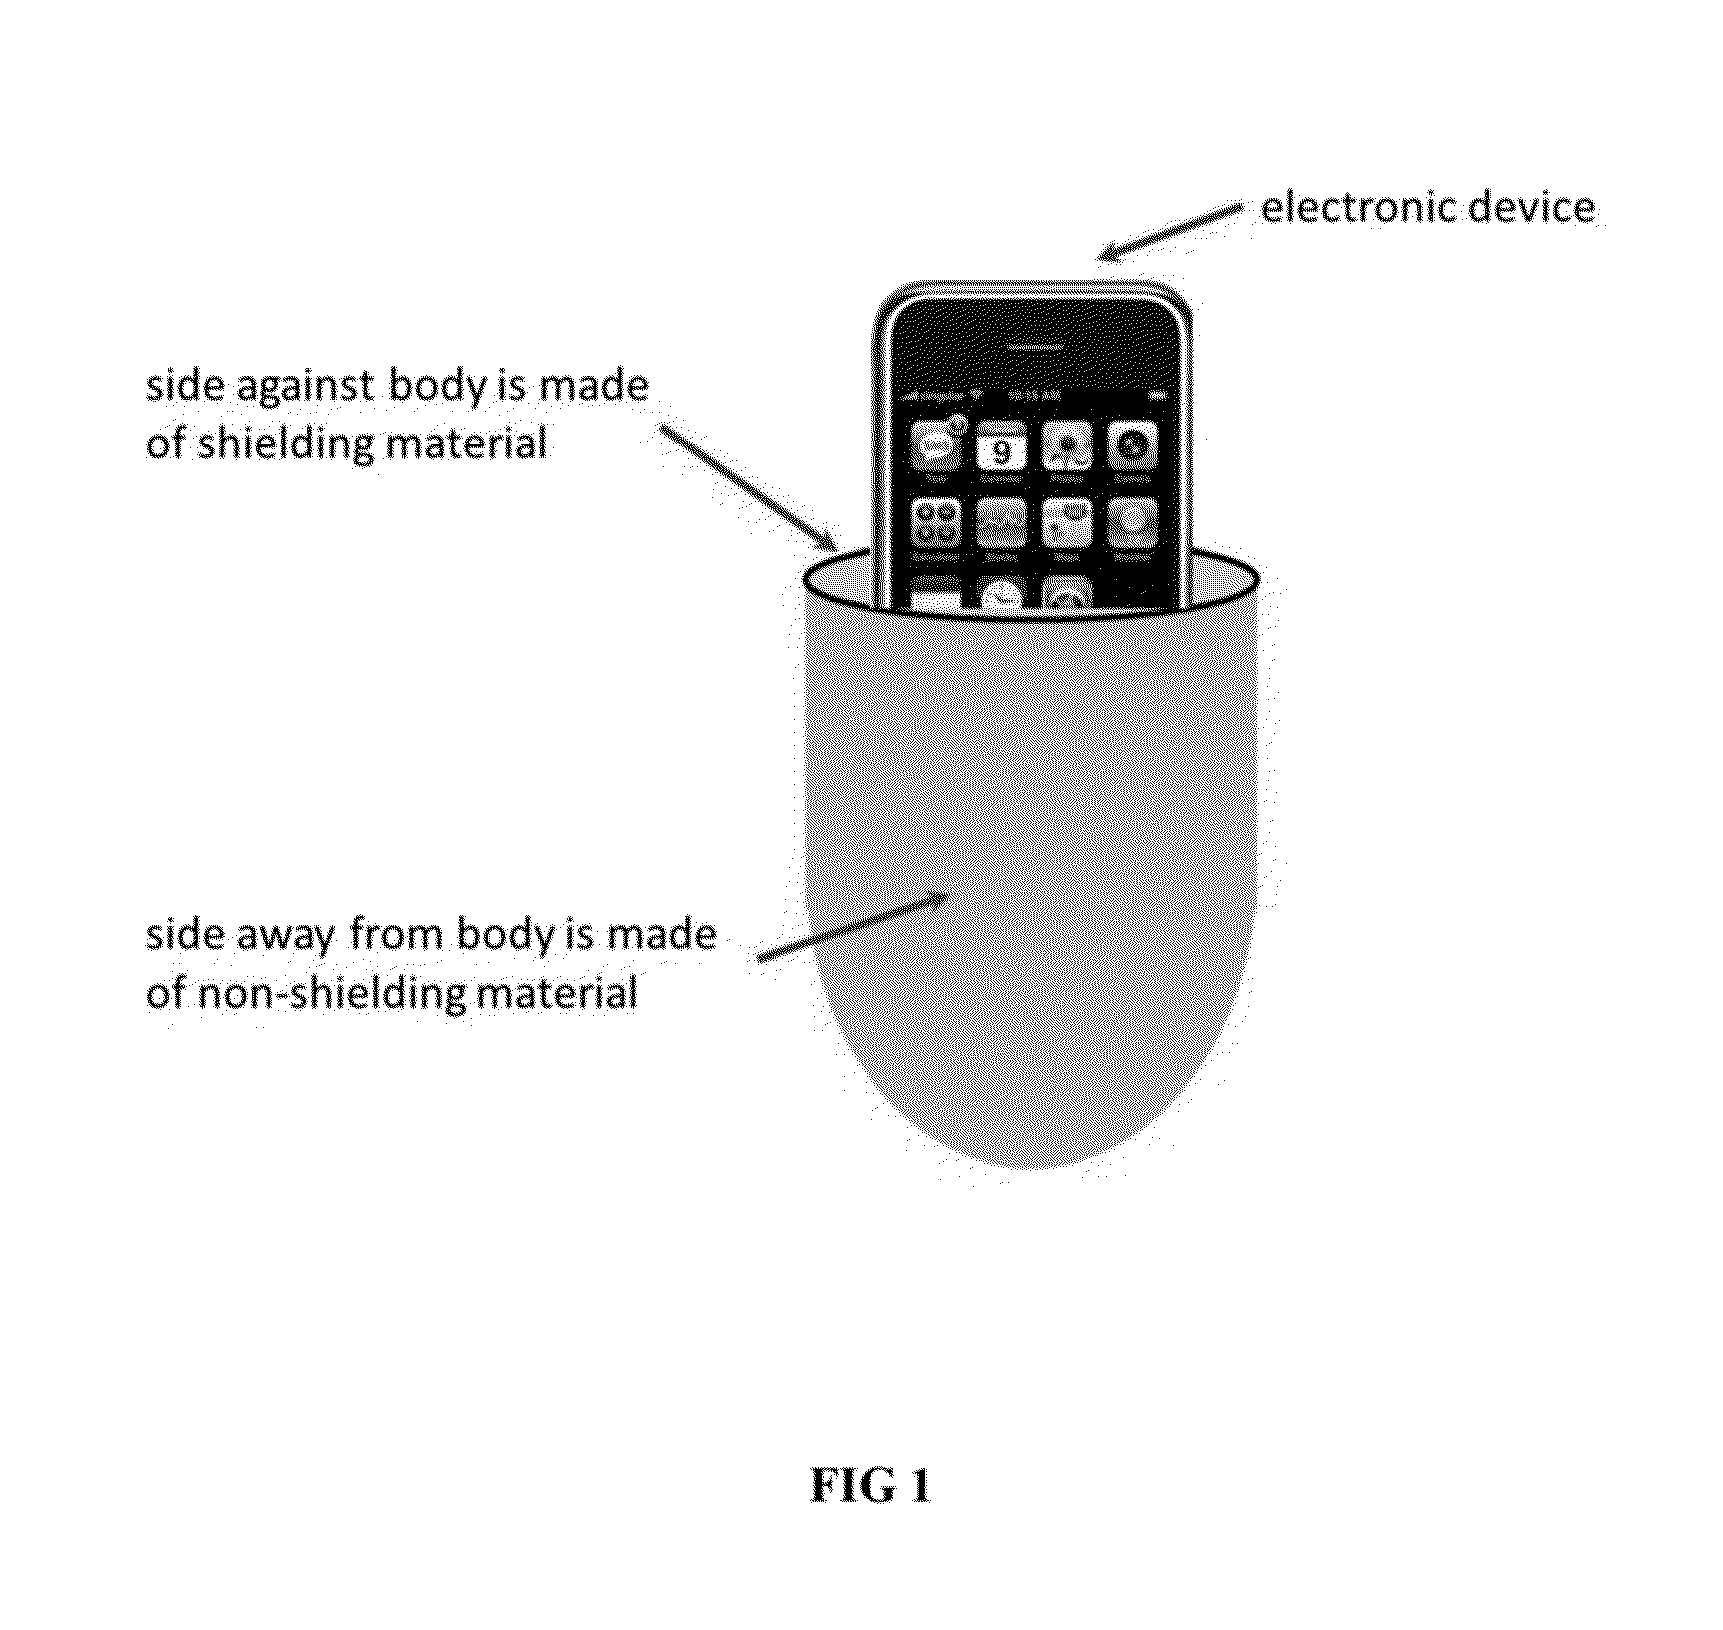 Thin Pocket Liner and Pad for Protection Against Electromagnetic Exposure when Carrying and/or Using Electronic Devices